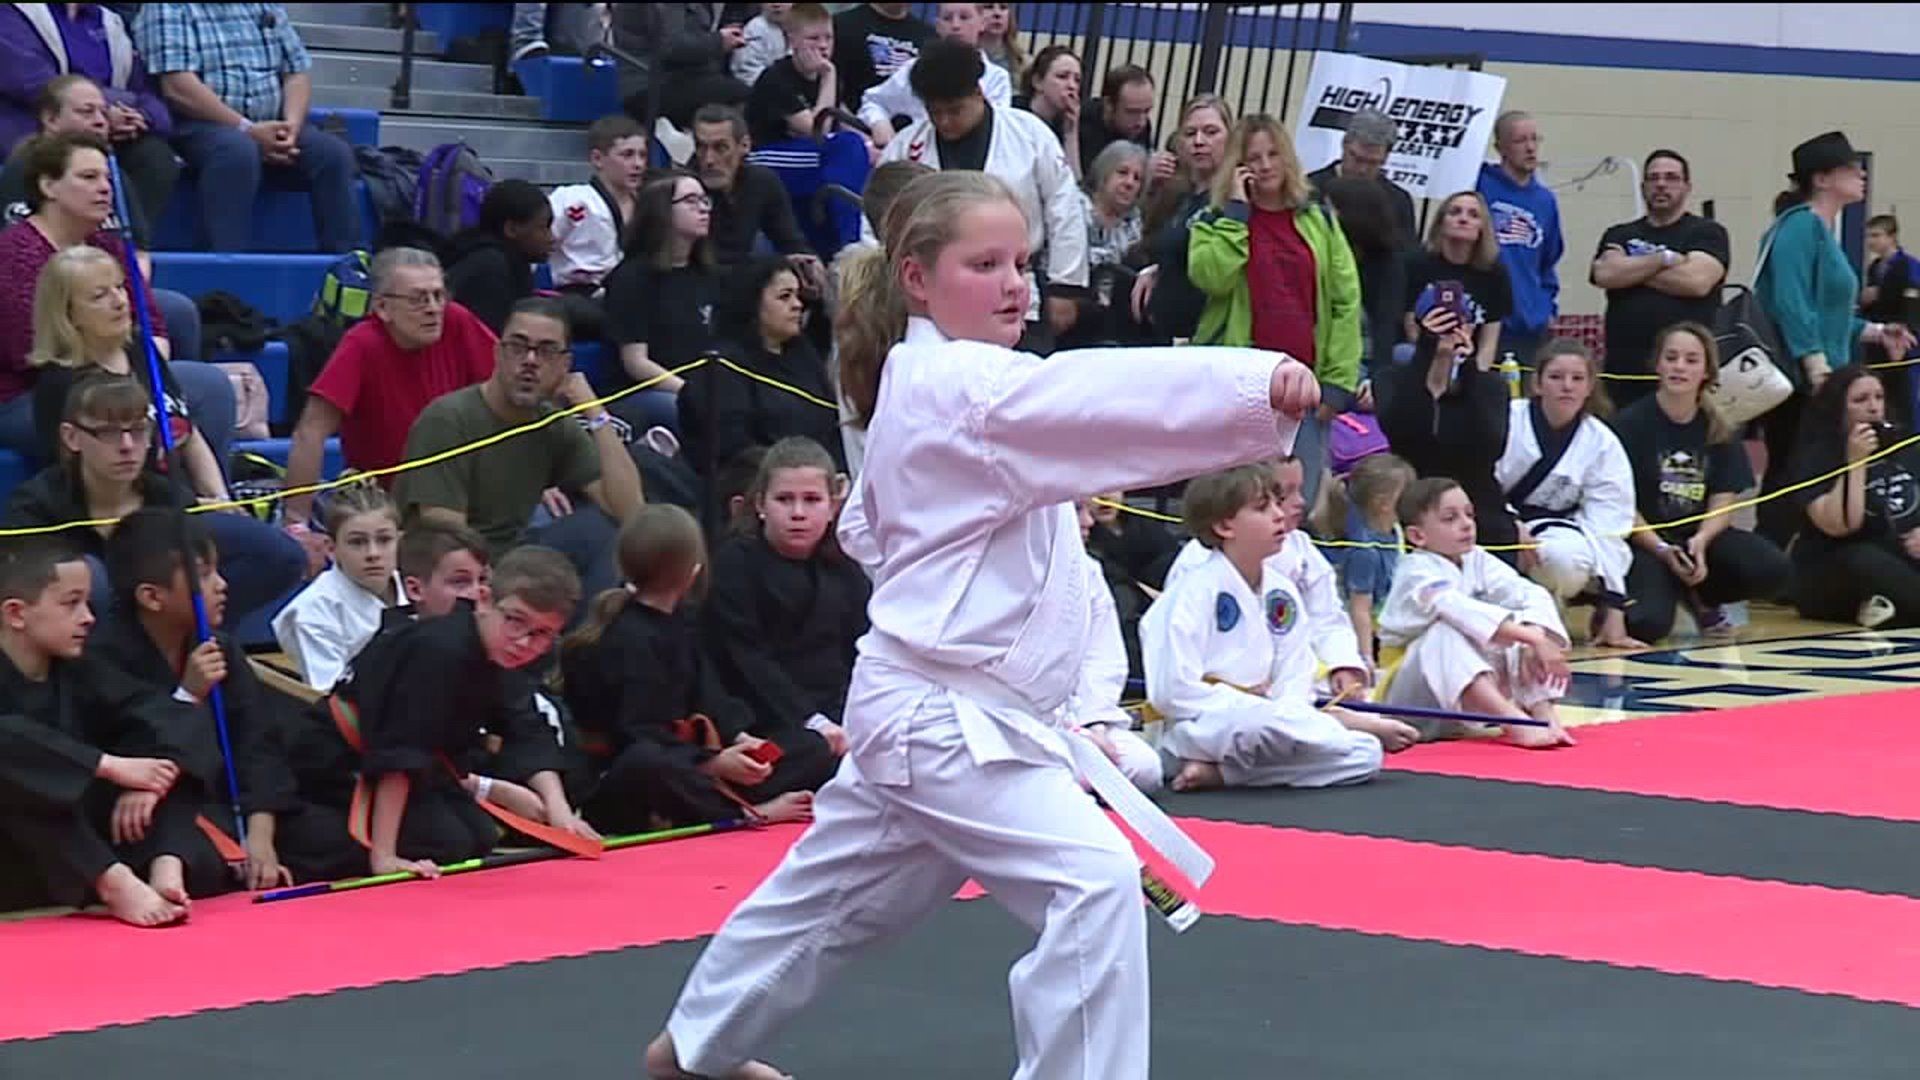 Martial Arts Tournament in Luzerne County